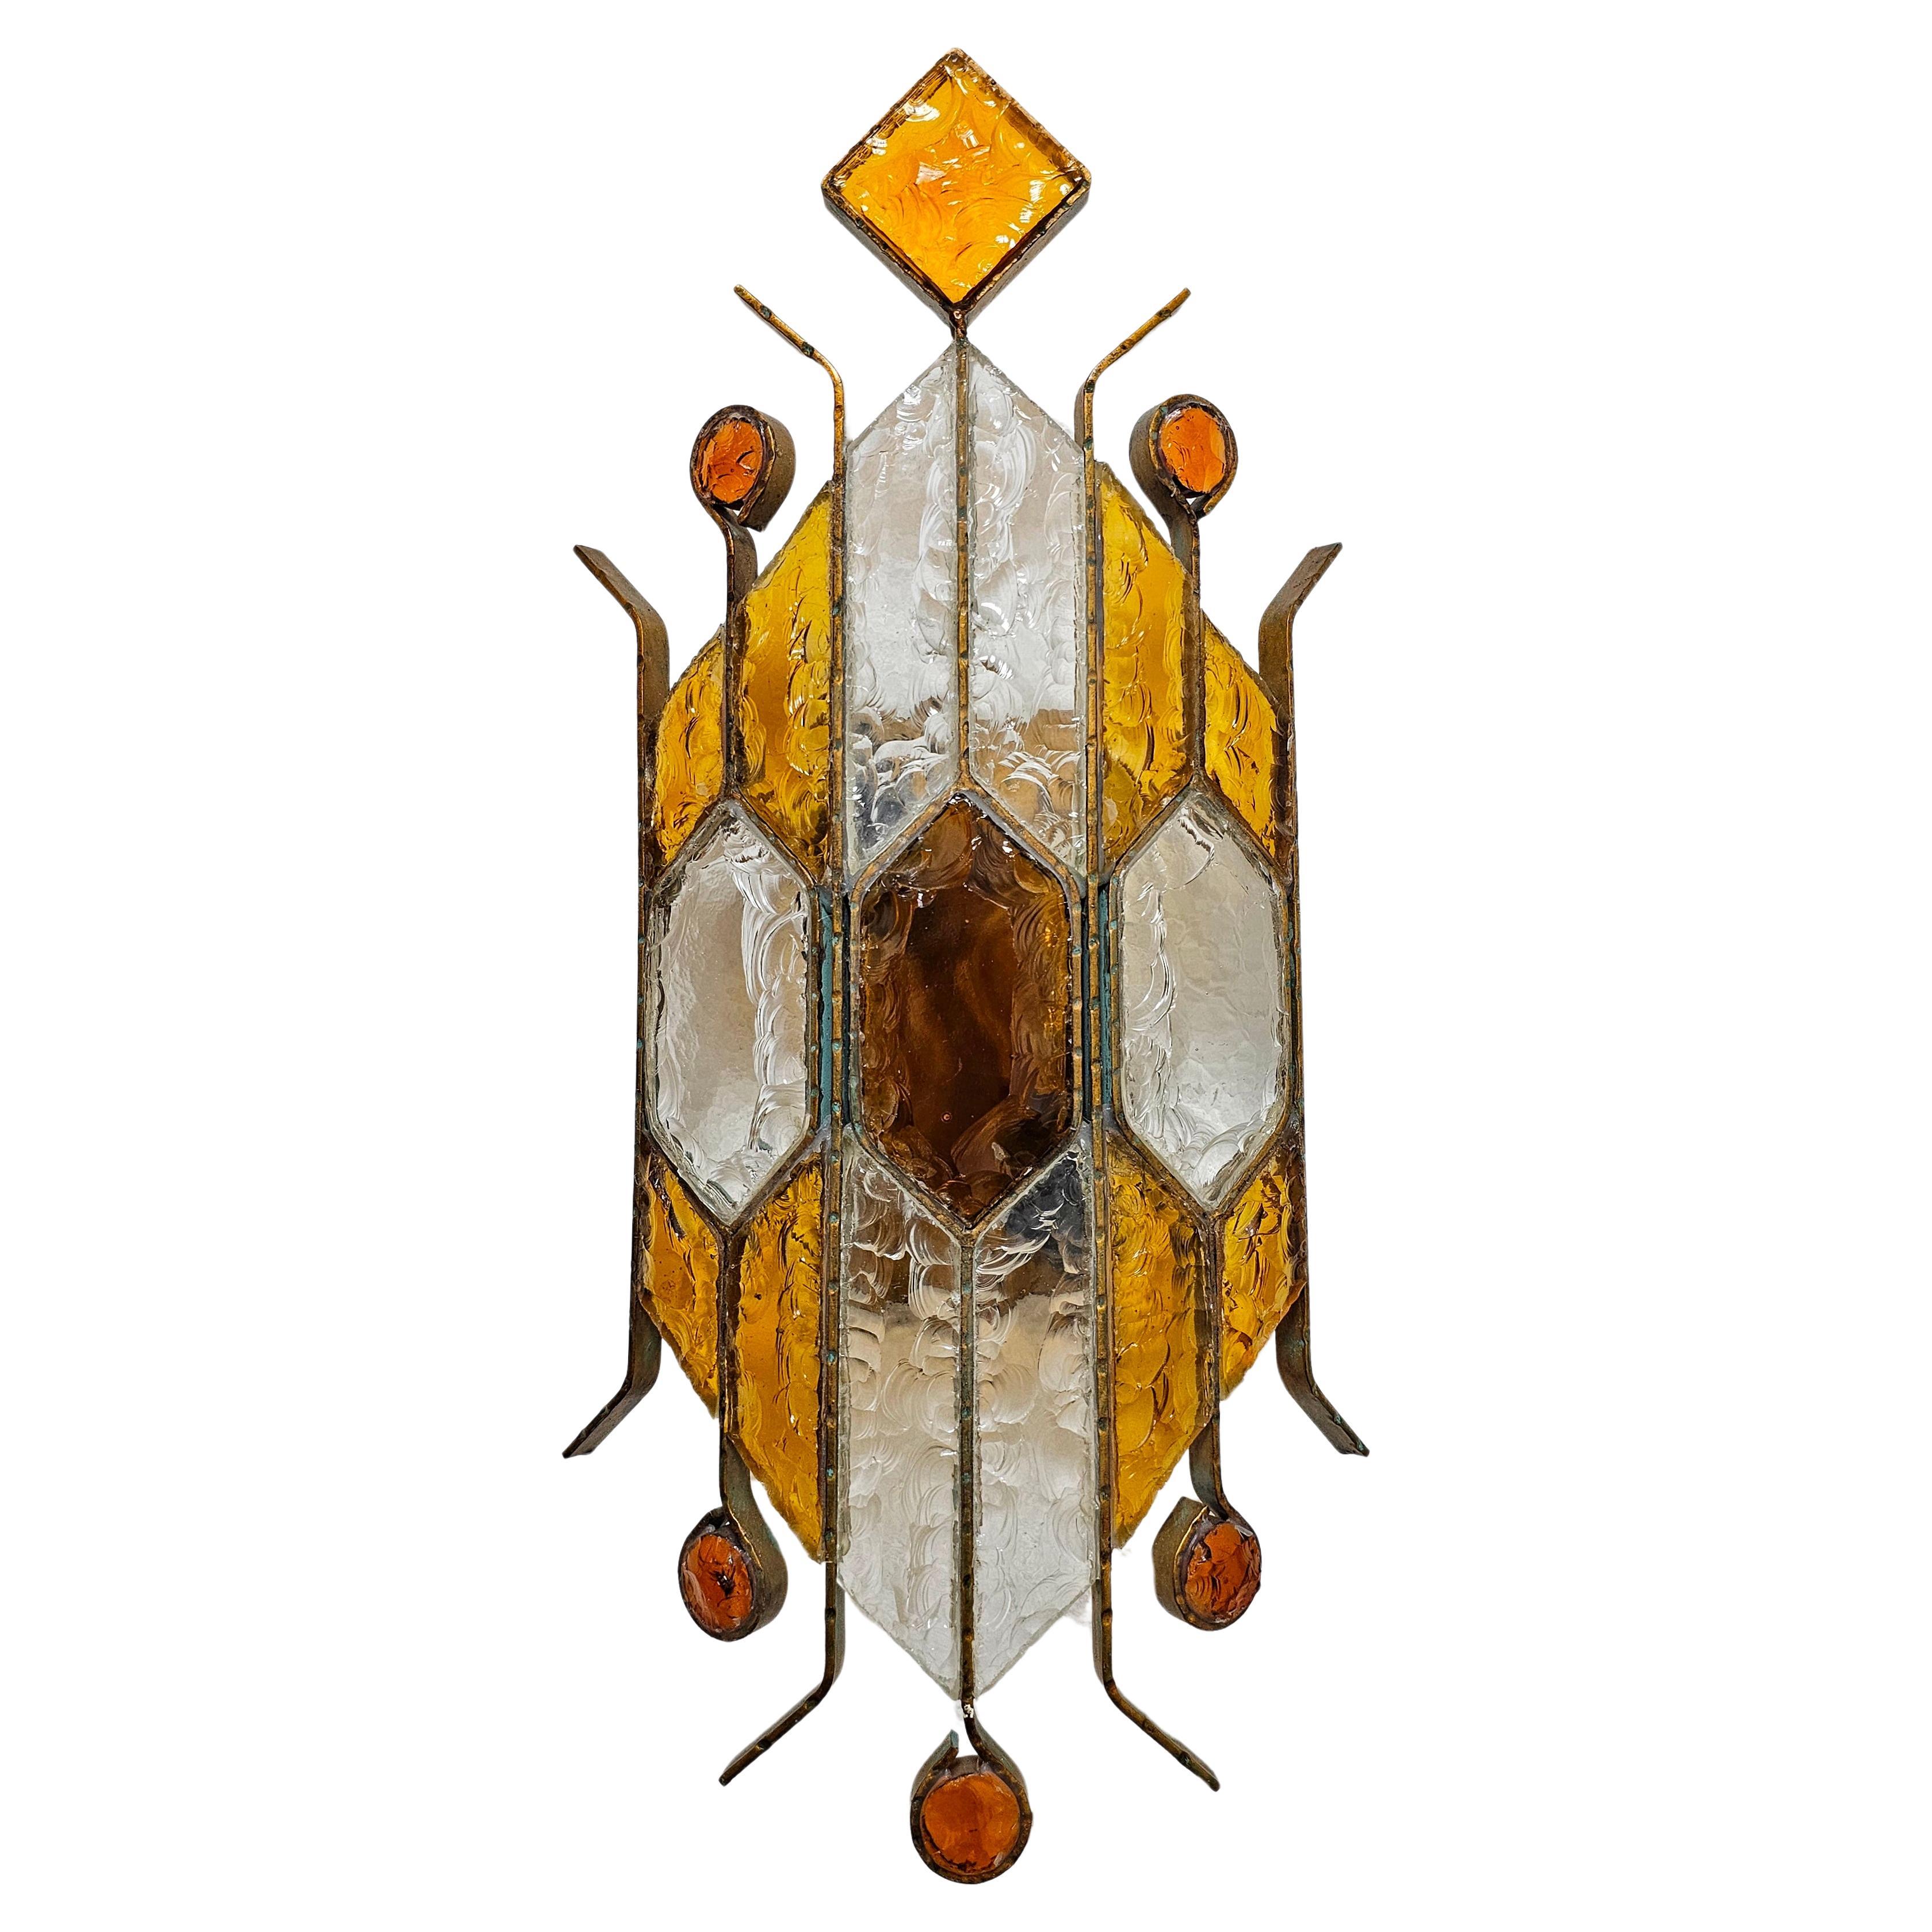 Brutalist Sconce in hammered glass by Biancardi and Jordan Arte, Italy 1970s